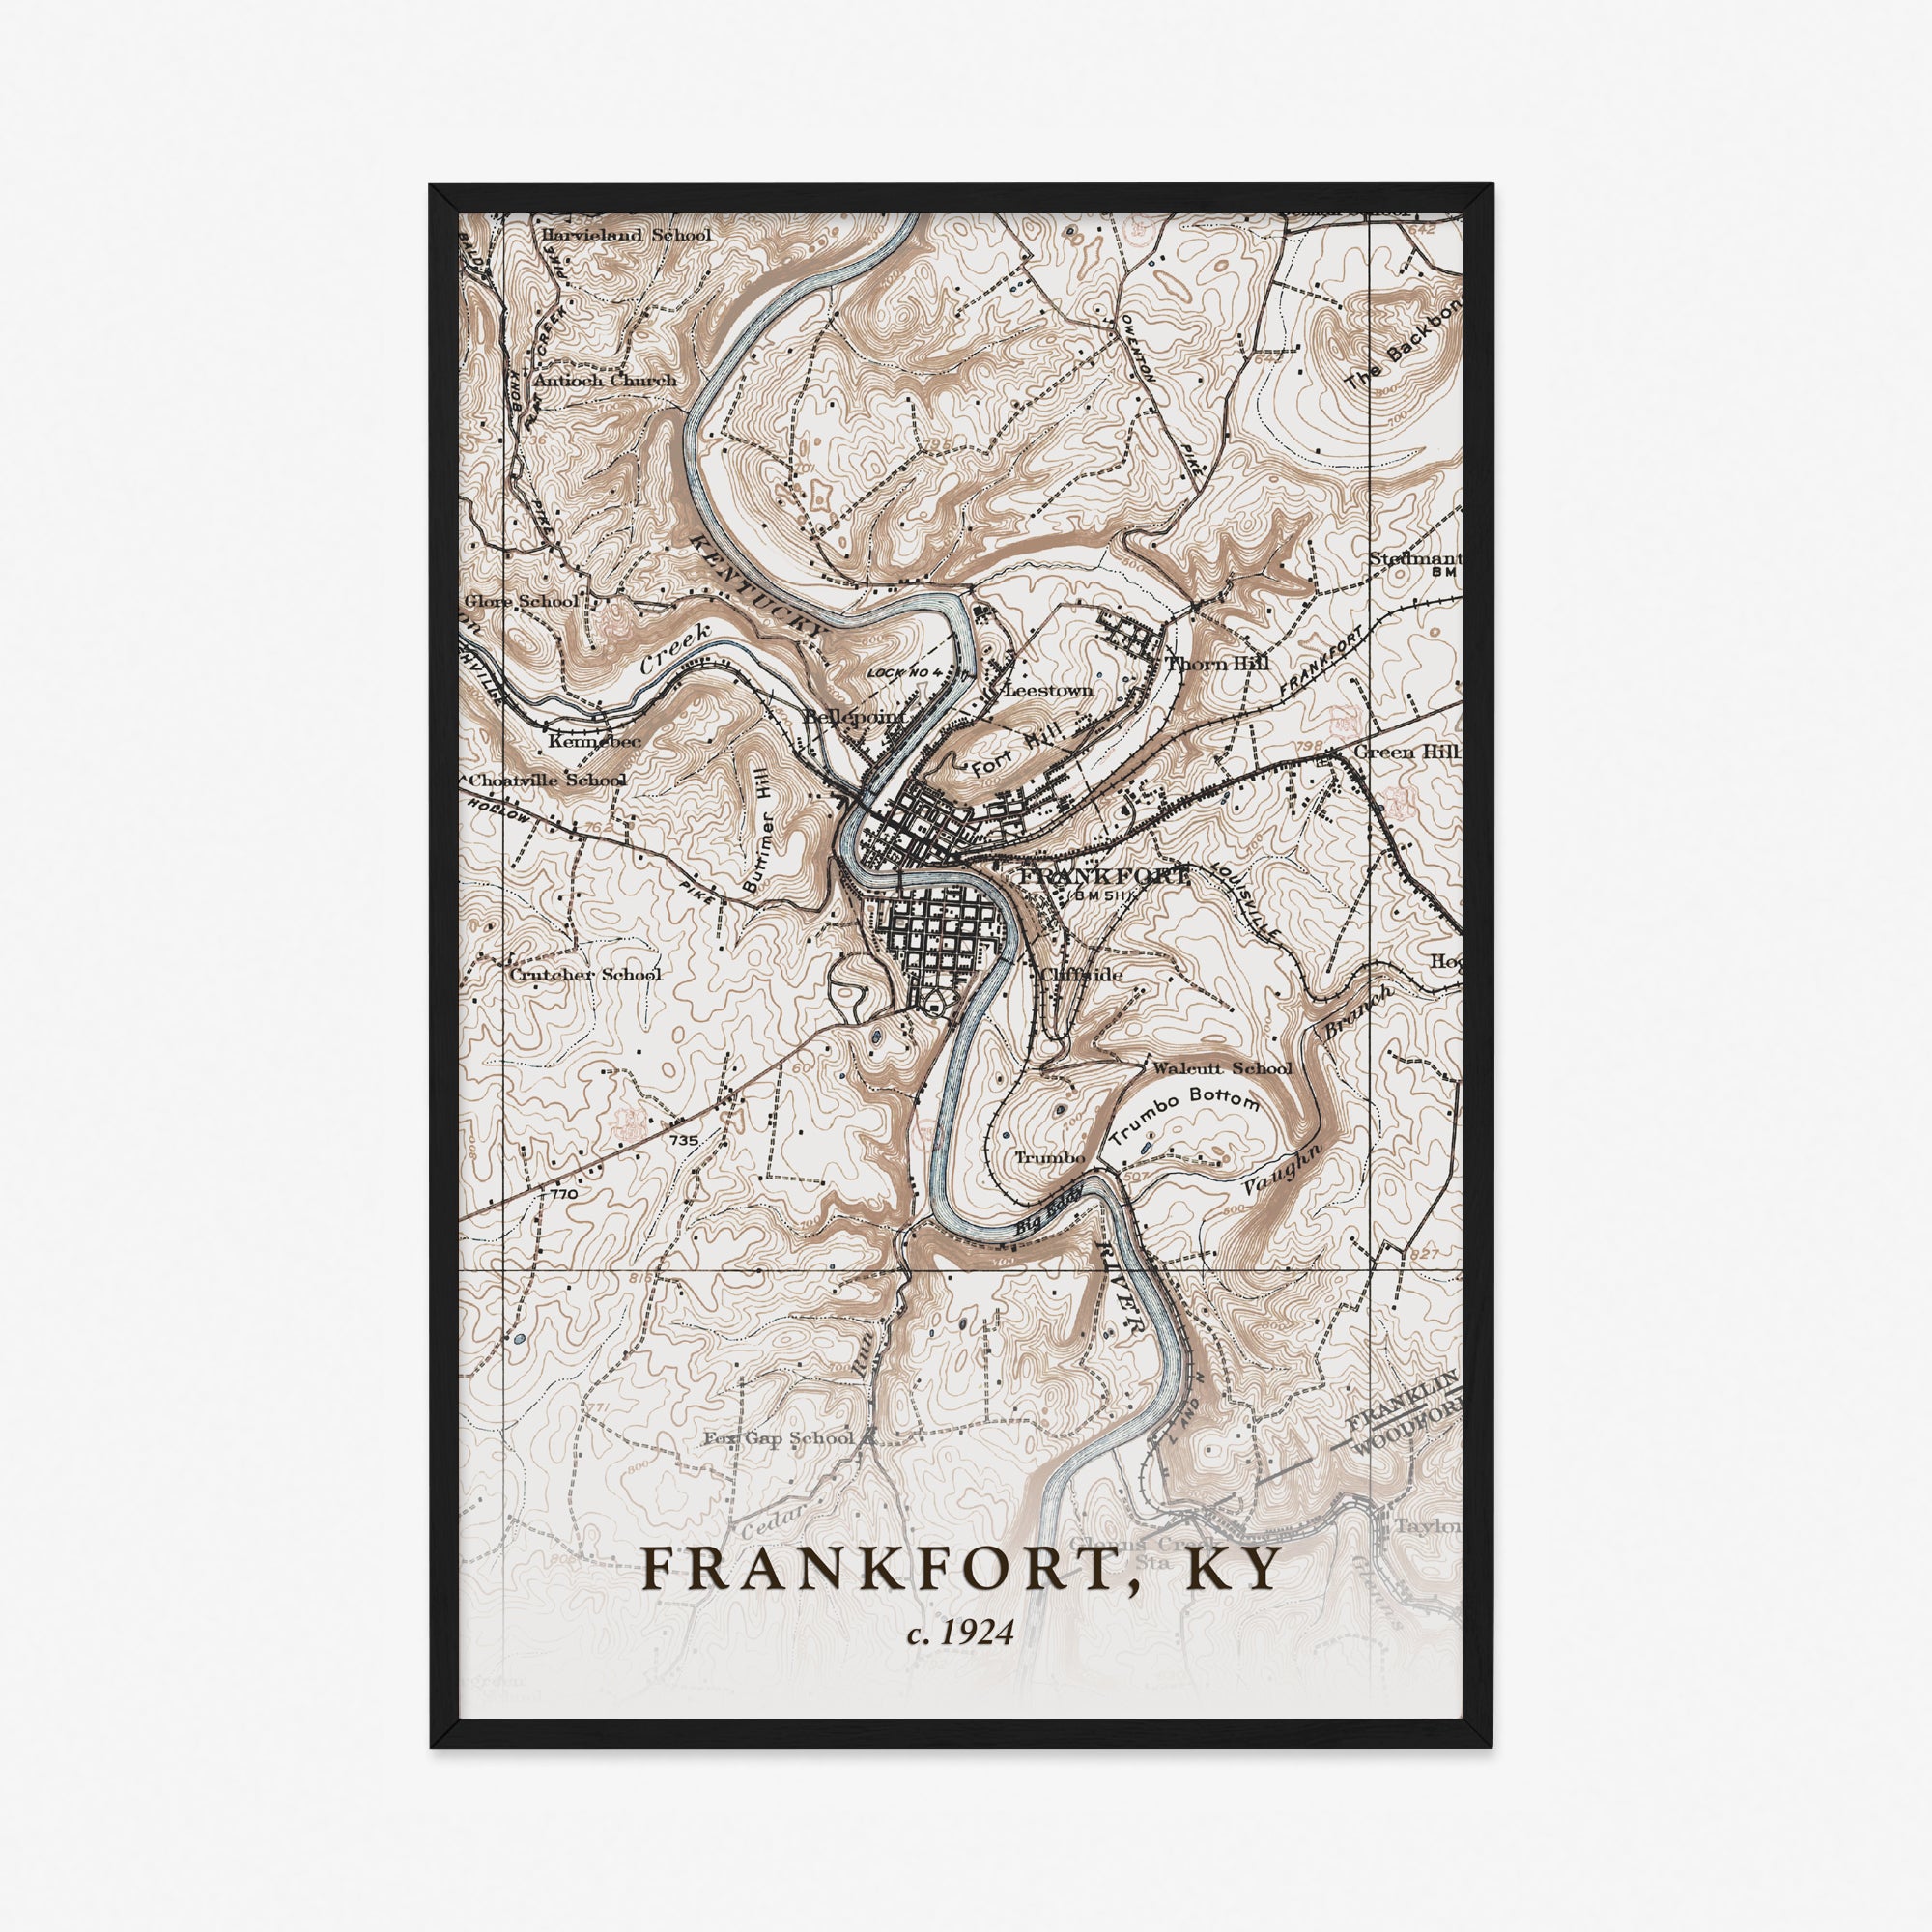 Frankfort, KY - 1924 Topographic Map